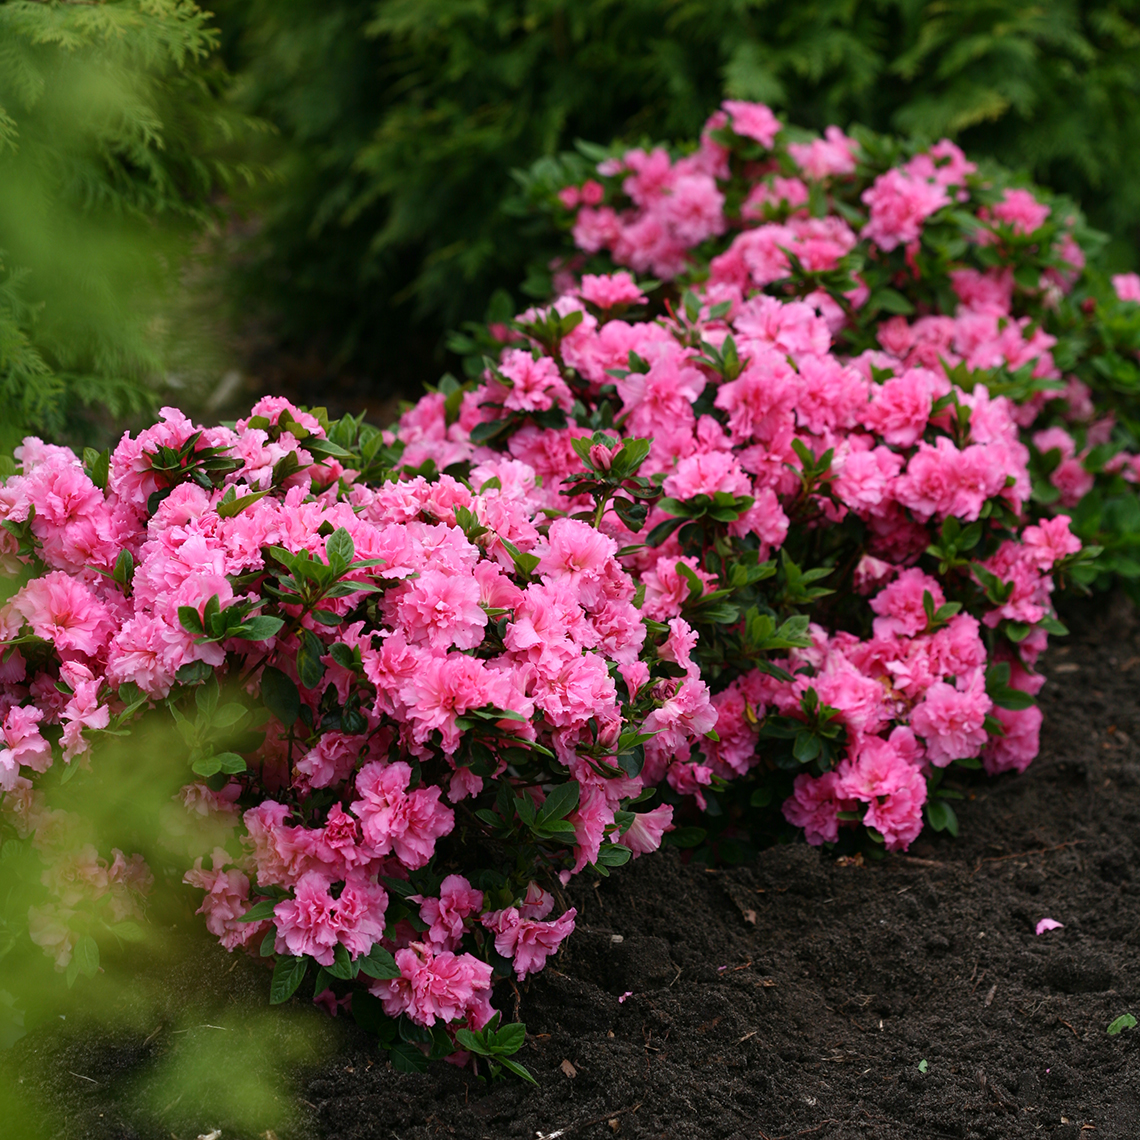 Trio of Bloom-A-Thon Pink Double reblooming azaleas planted in arc in garden